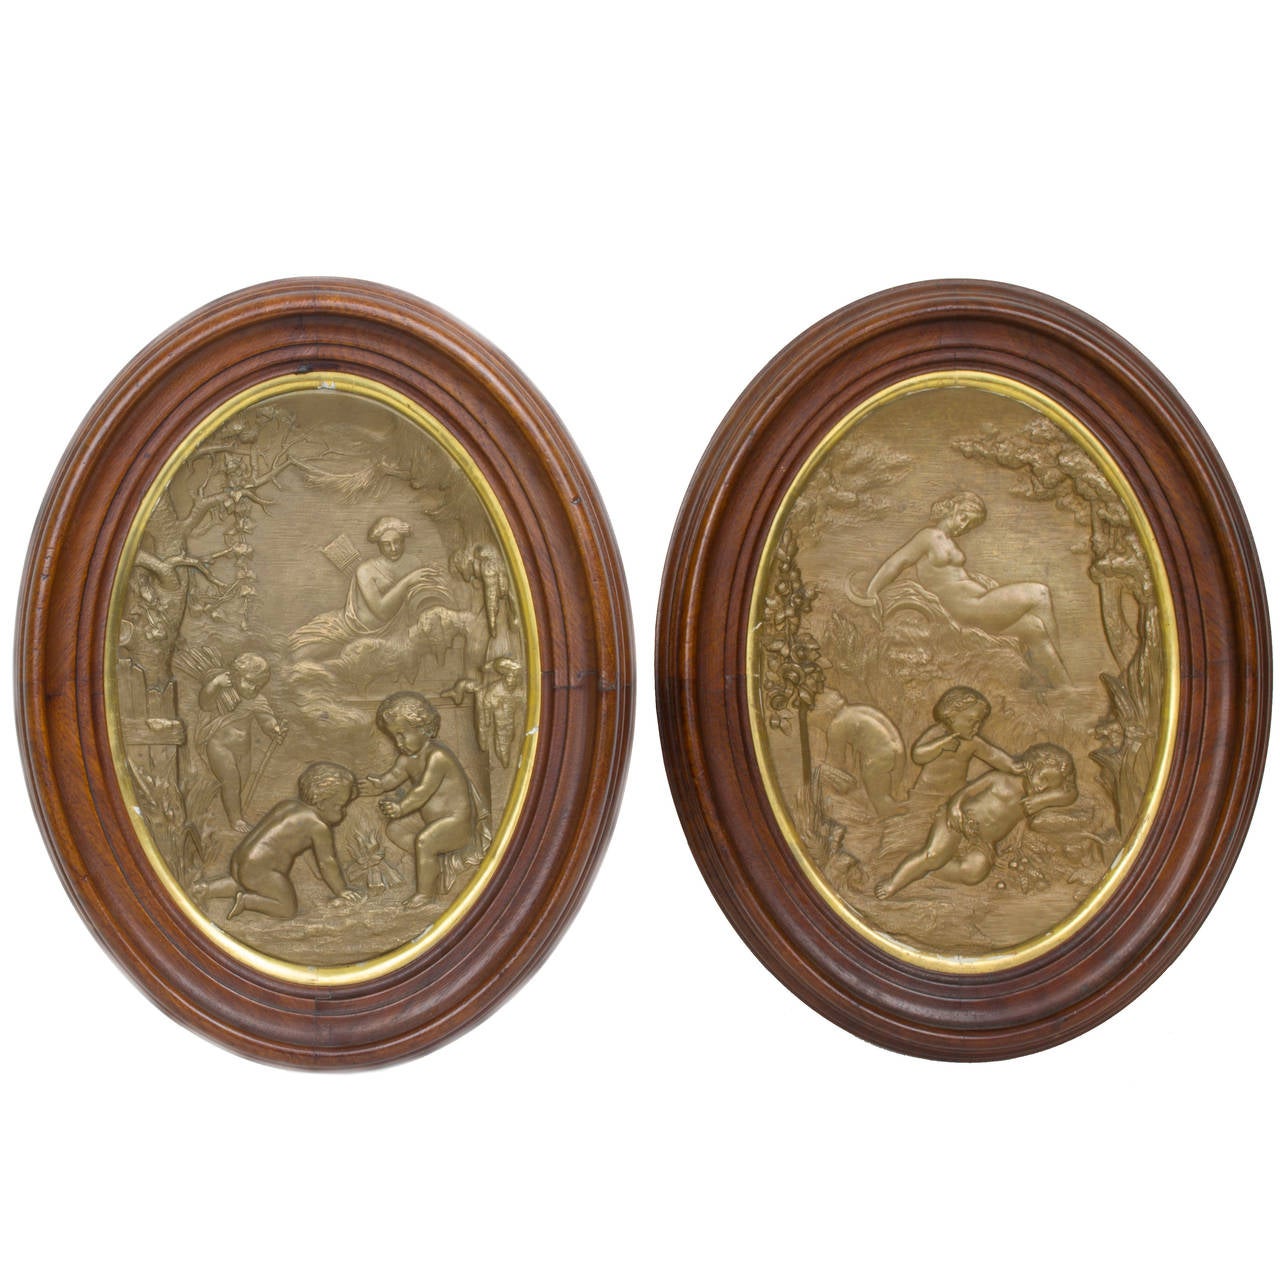 Pair of Oval Patinated Metal Wall Plaques with Cherub Decorations